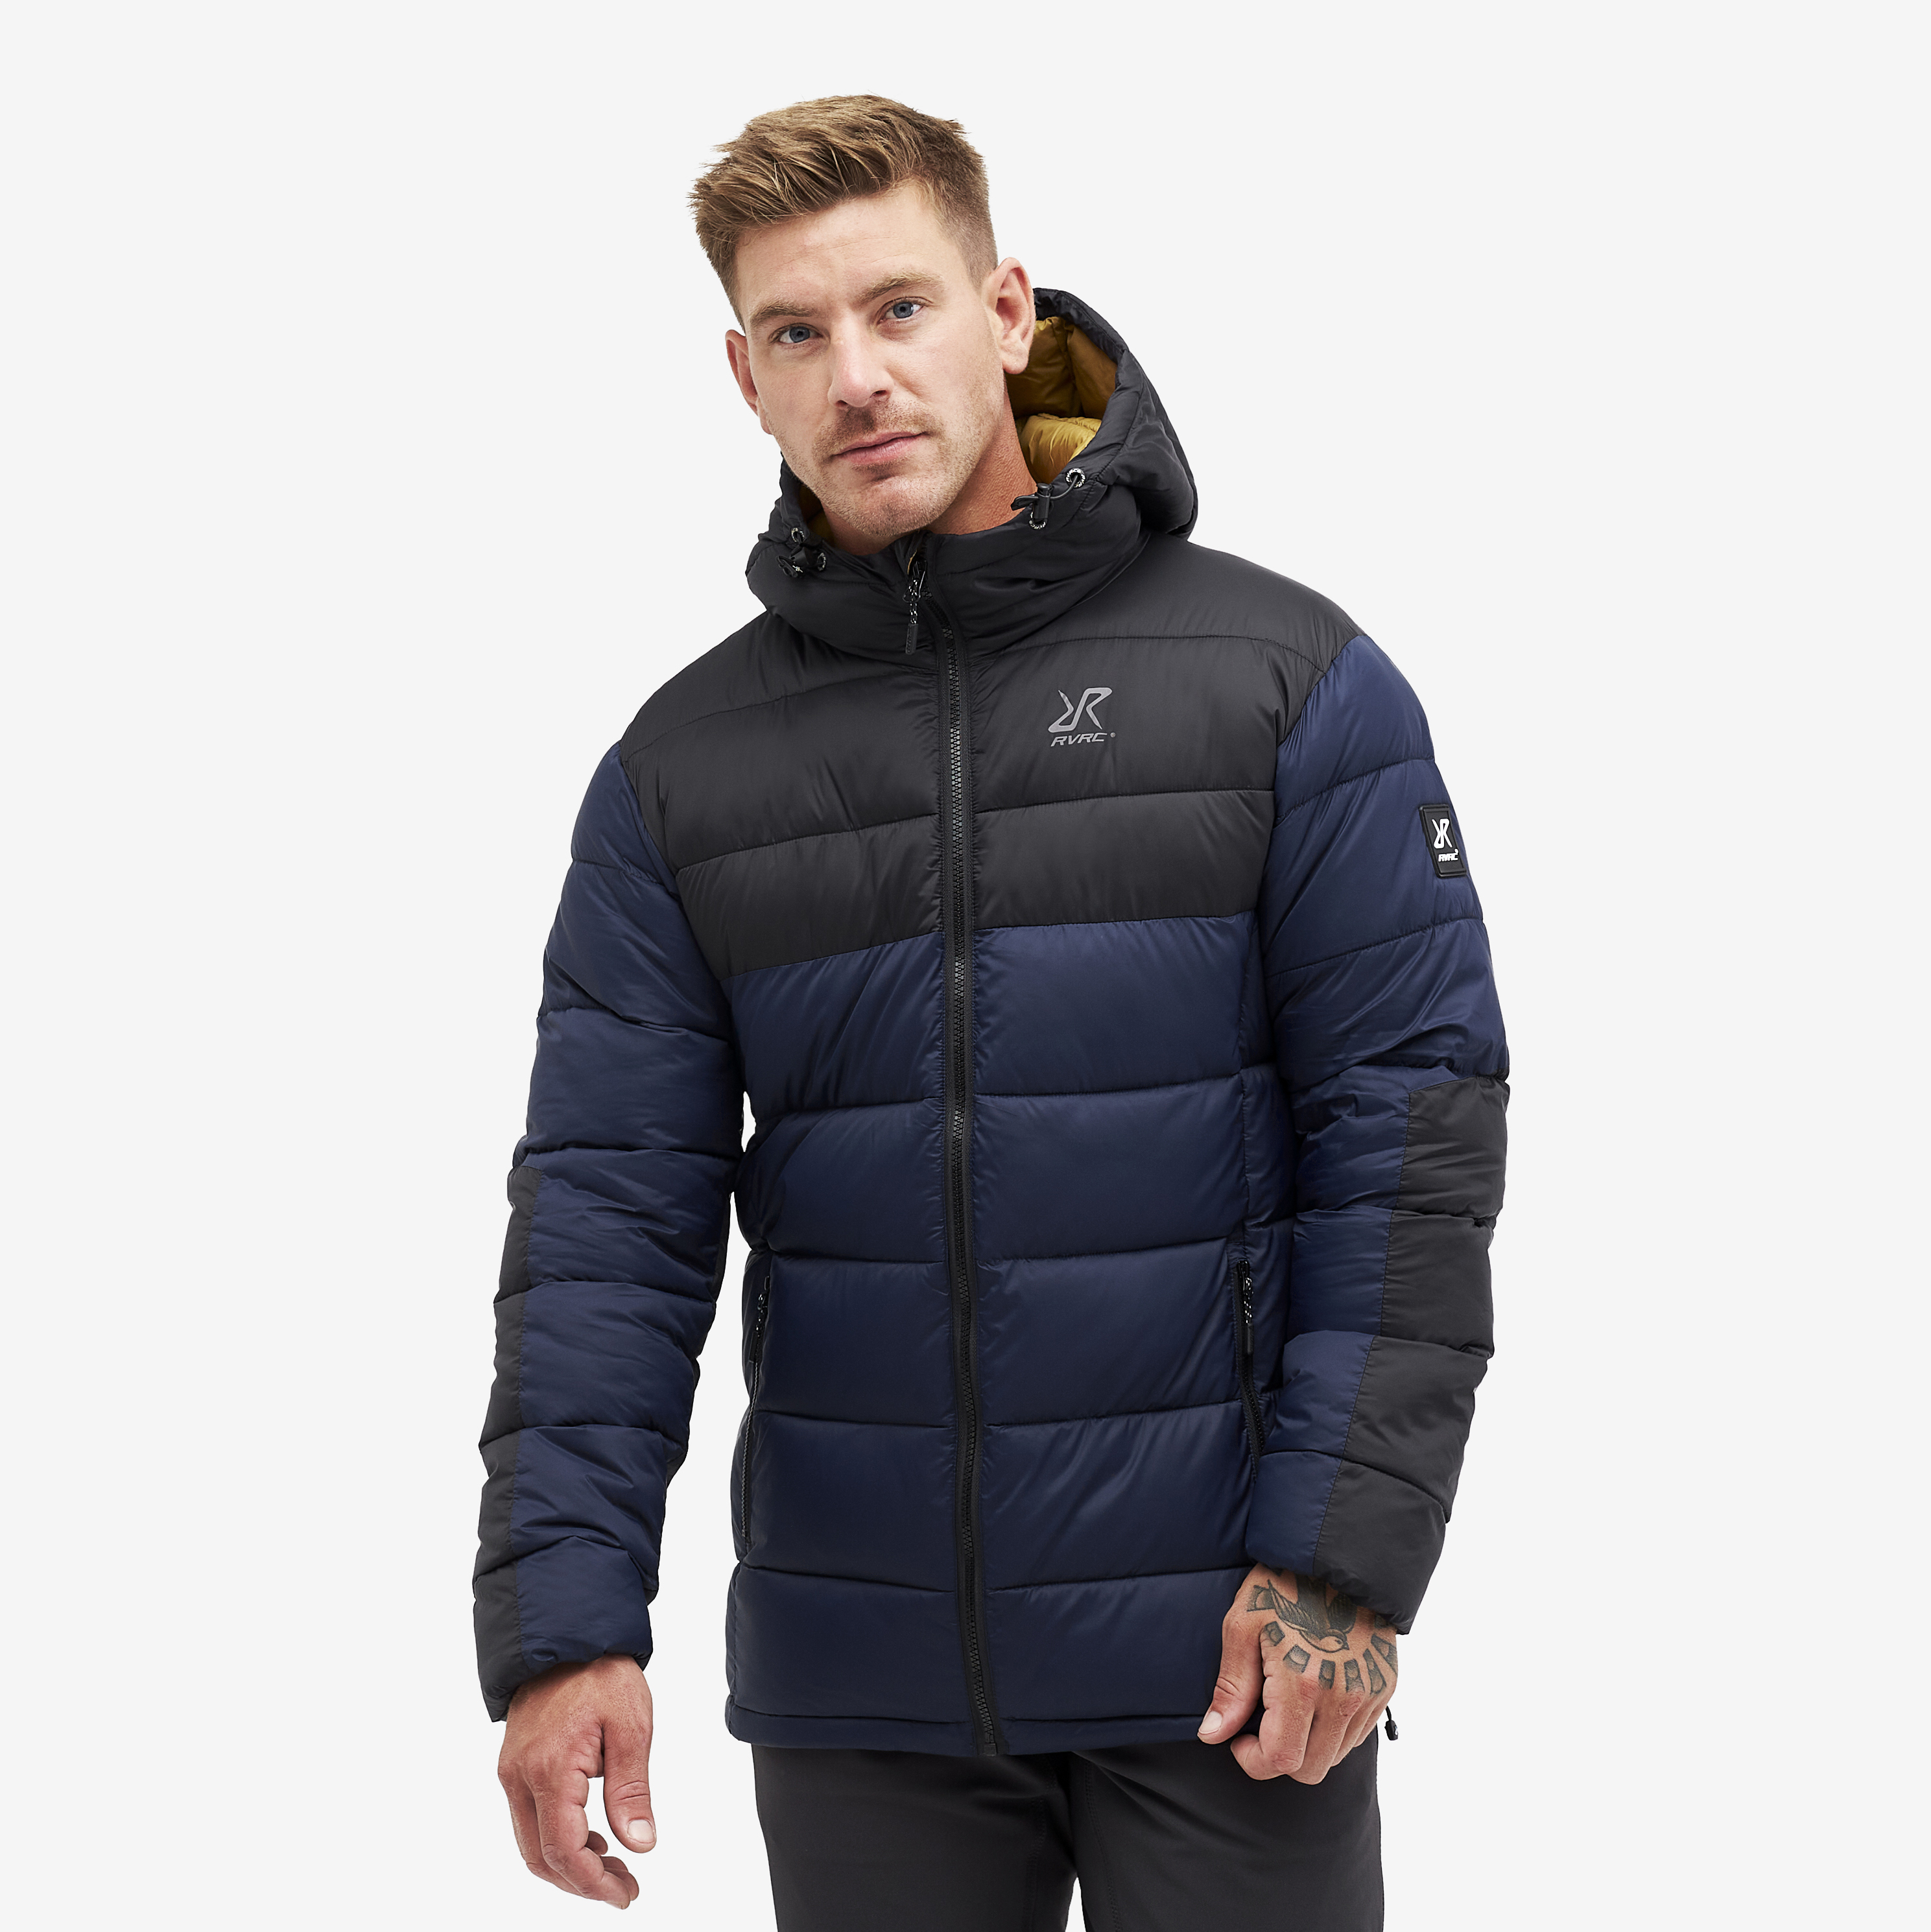 Mongoose  Jacket Navy Homme